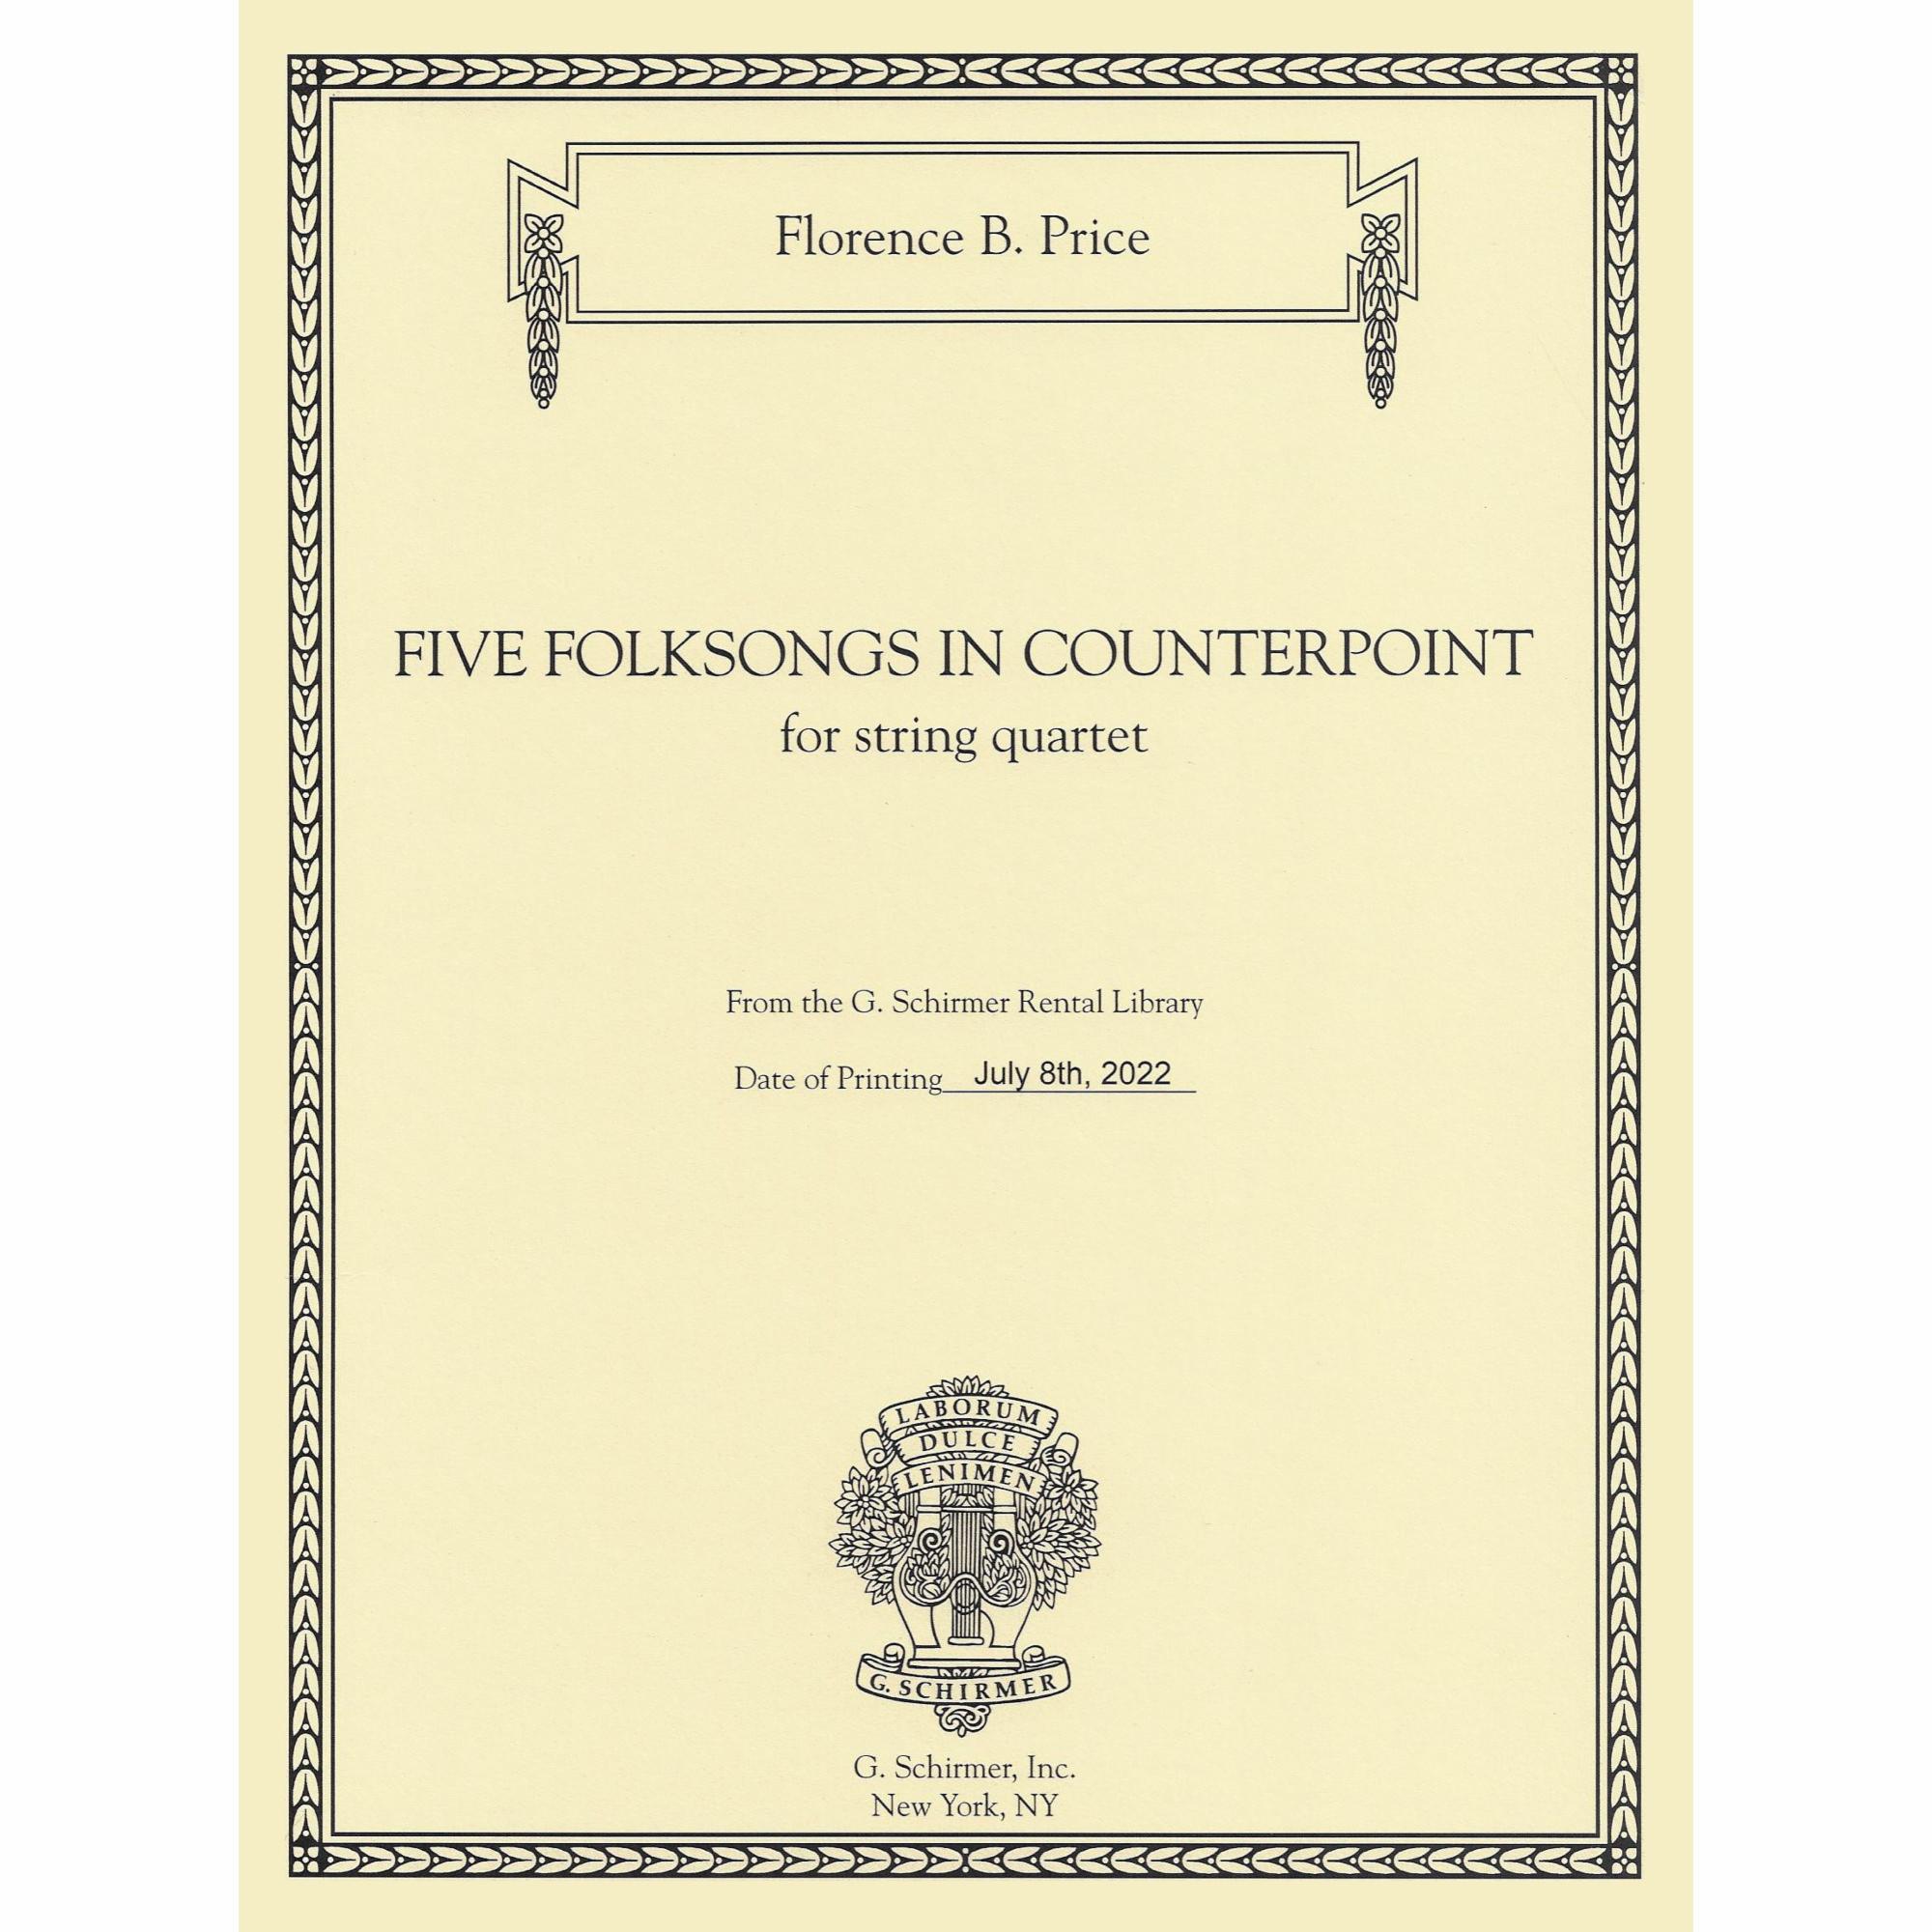 Price -- Five Folk Songs in Counterpoint for String Quartet